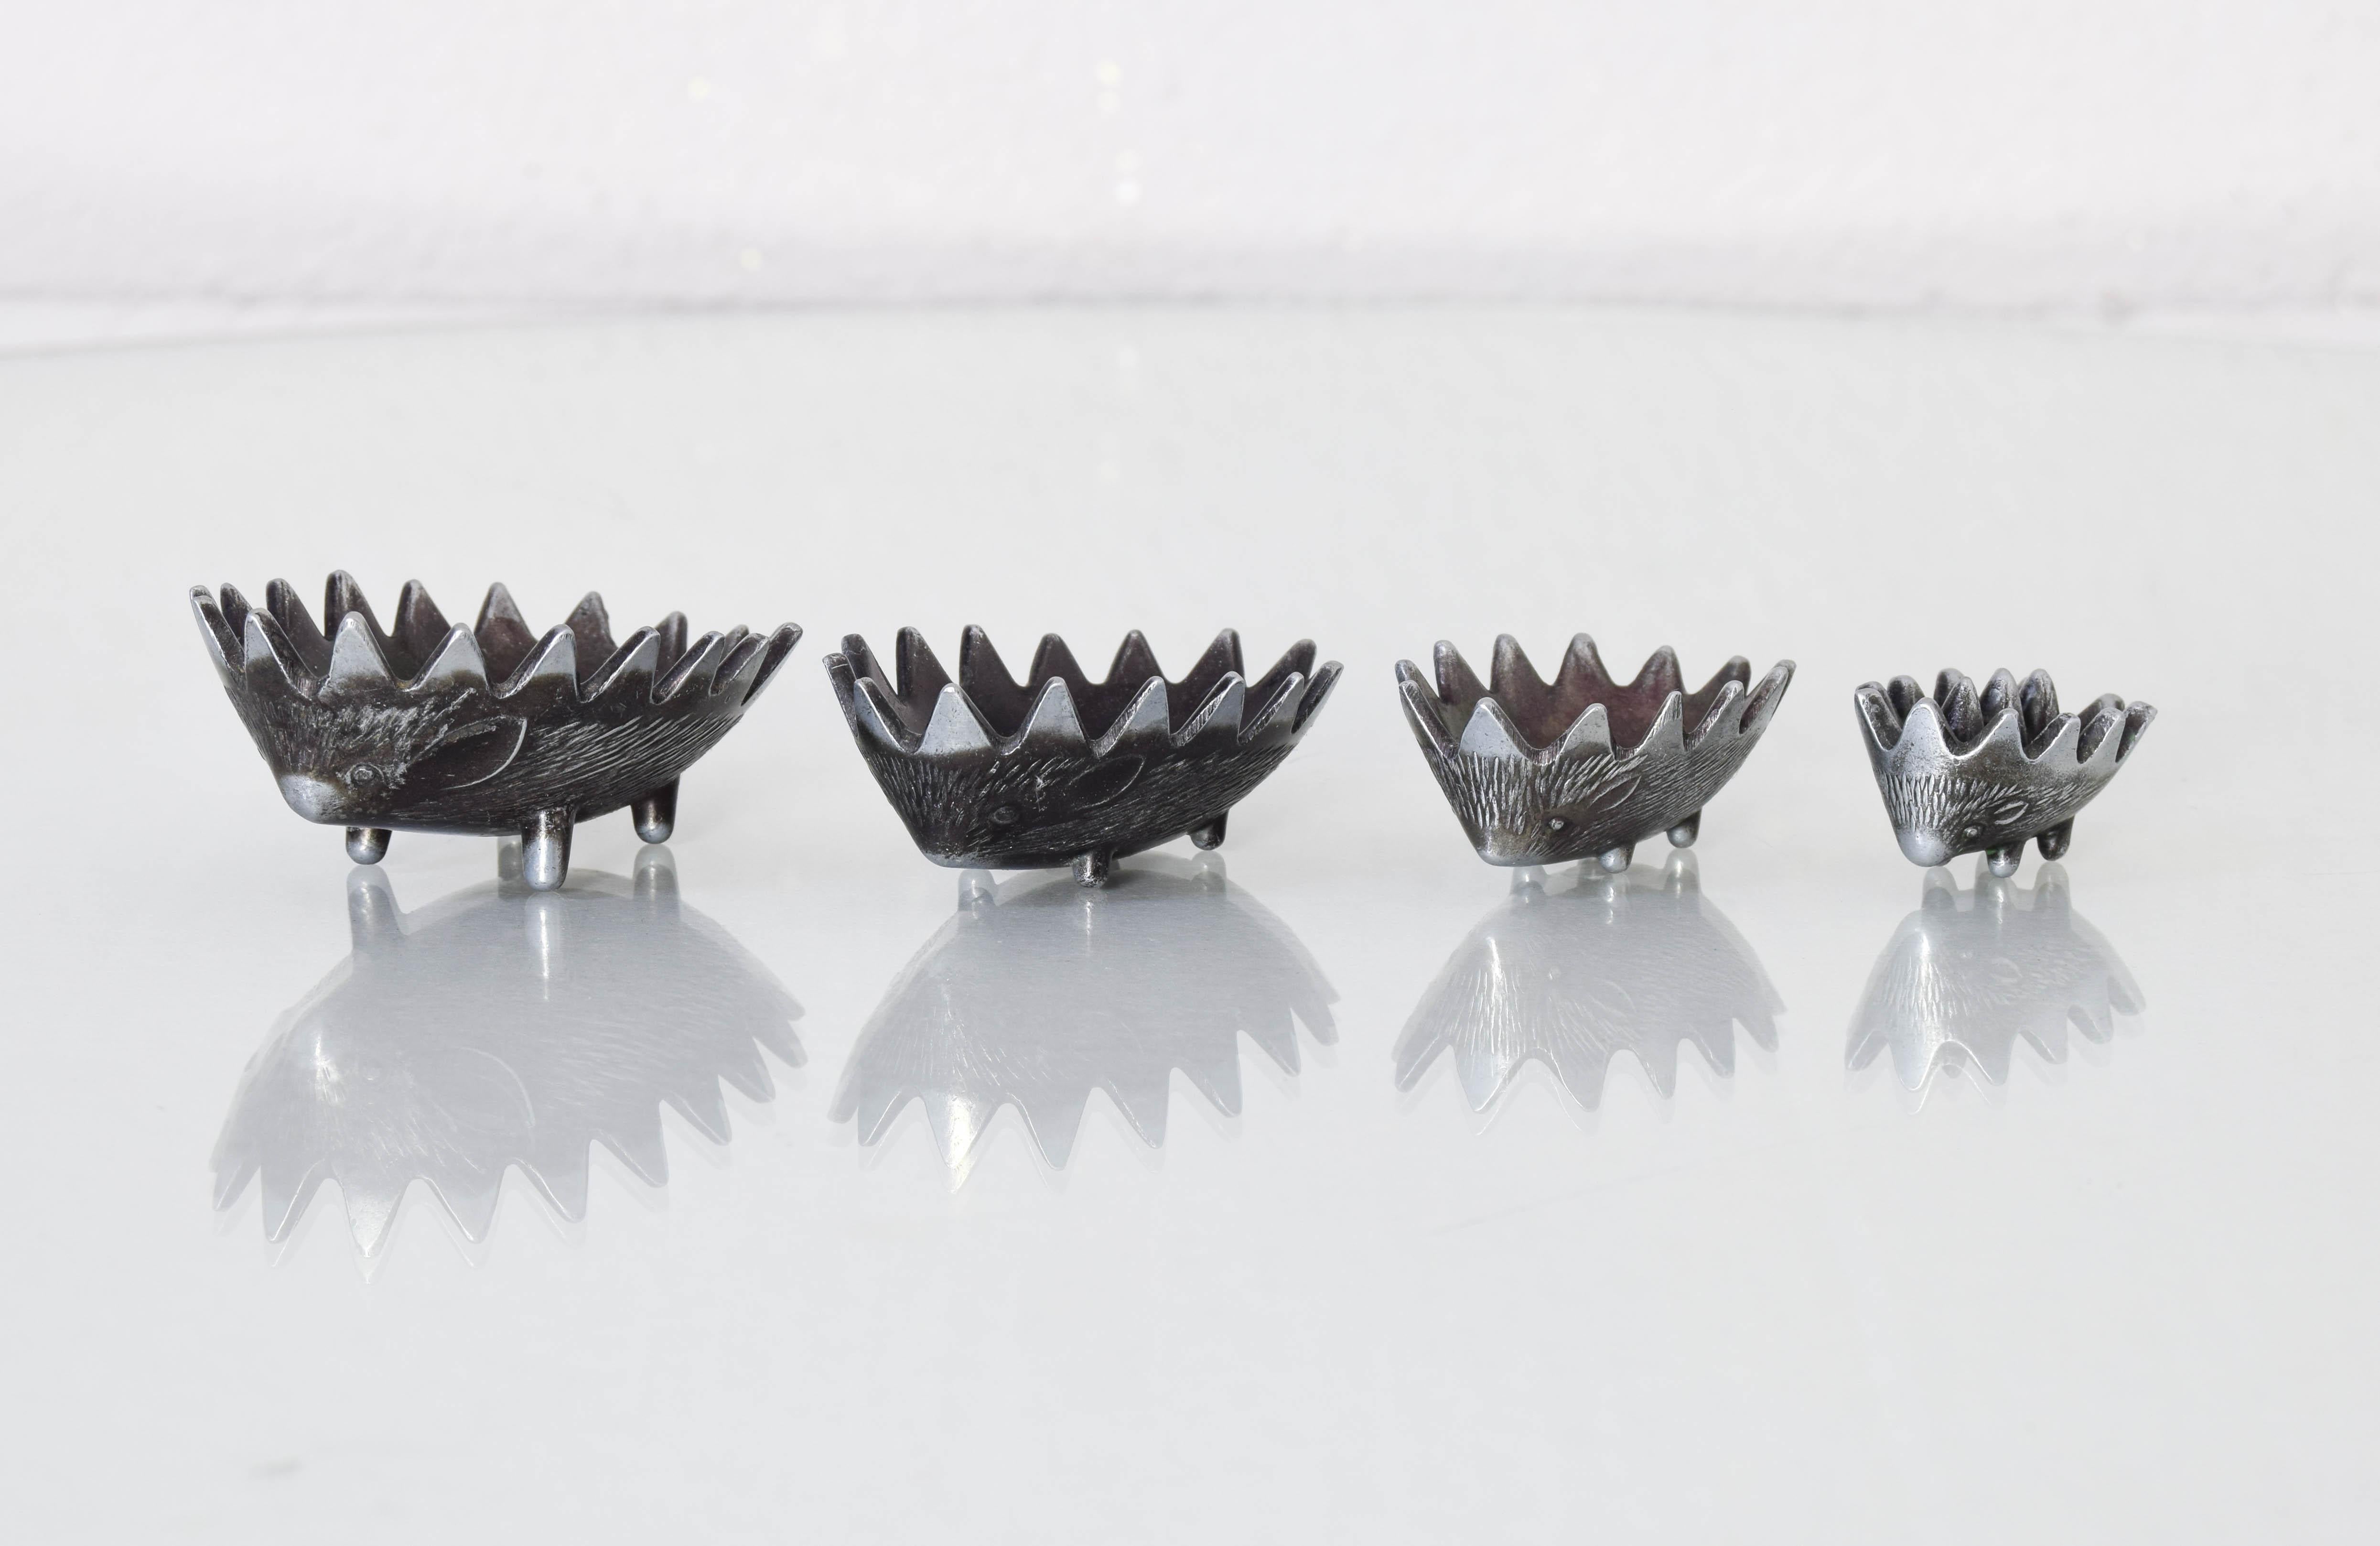 After an original design in brass by Walter Bosse, this pewter ashtray was used by the Russian airline Aeroflot as a souvenir gift in the late 1950s. 
Concave urchin containers nest inside each other from largest to smallest, forming a Full hedgehog